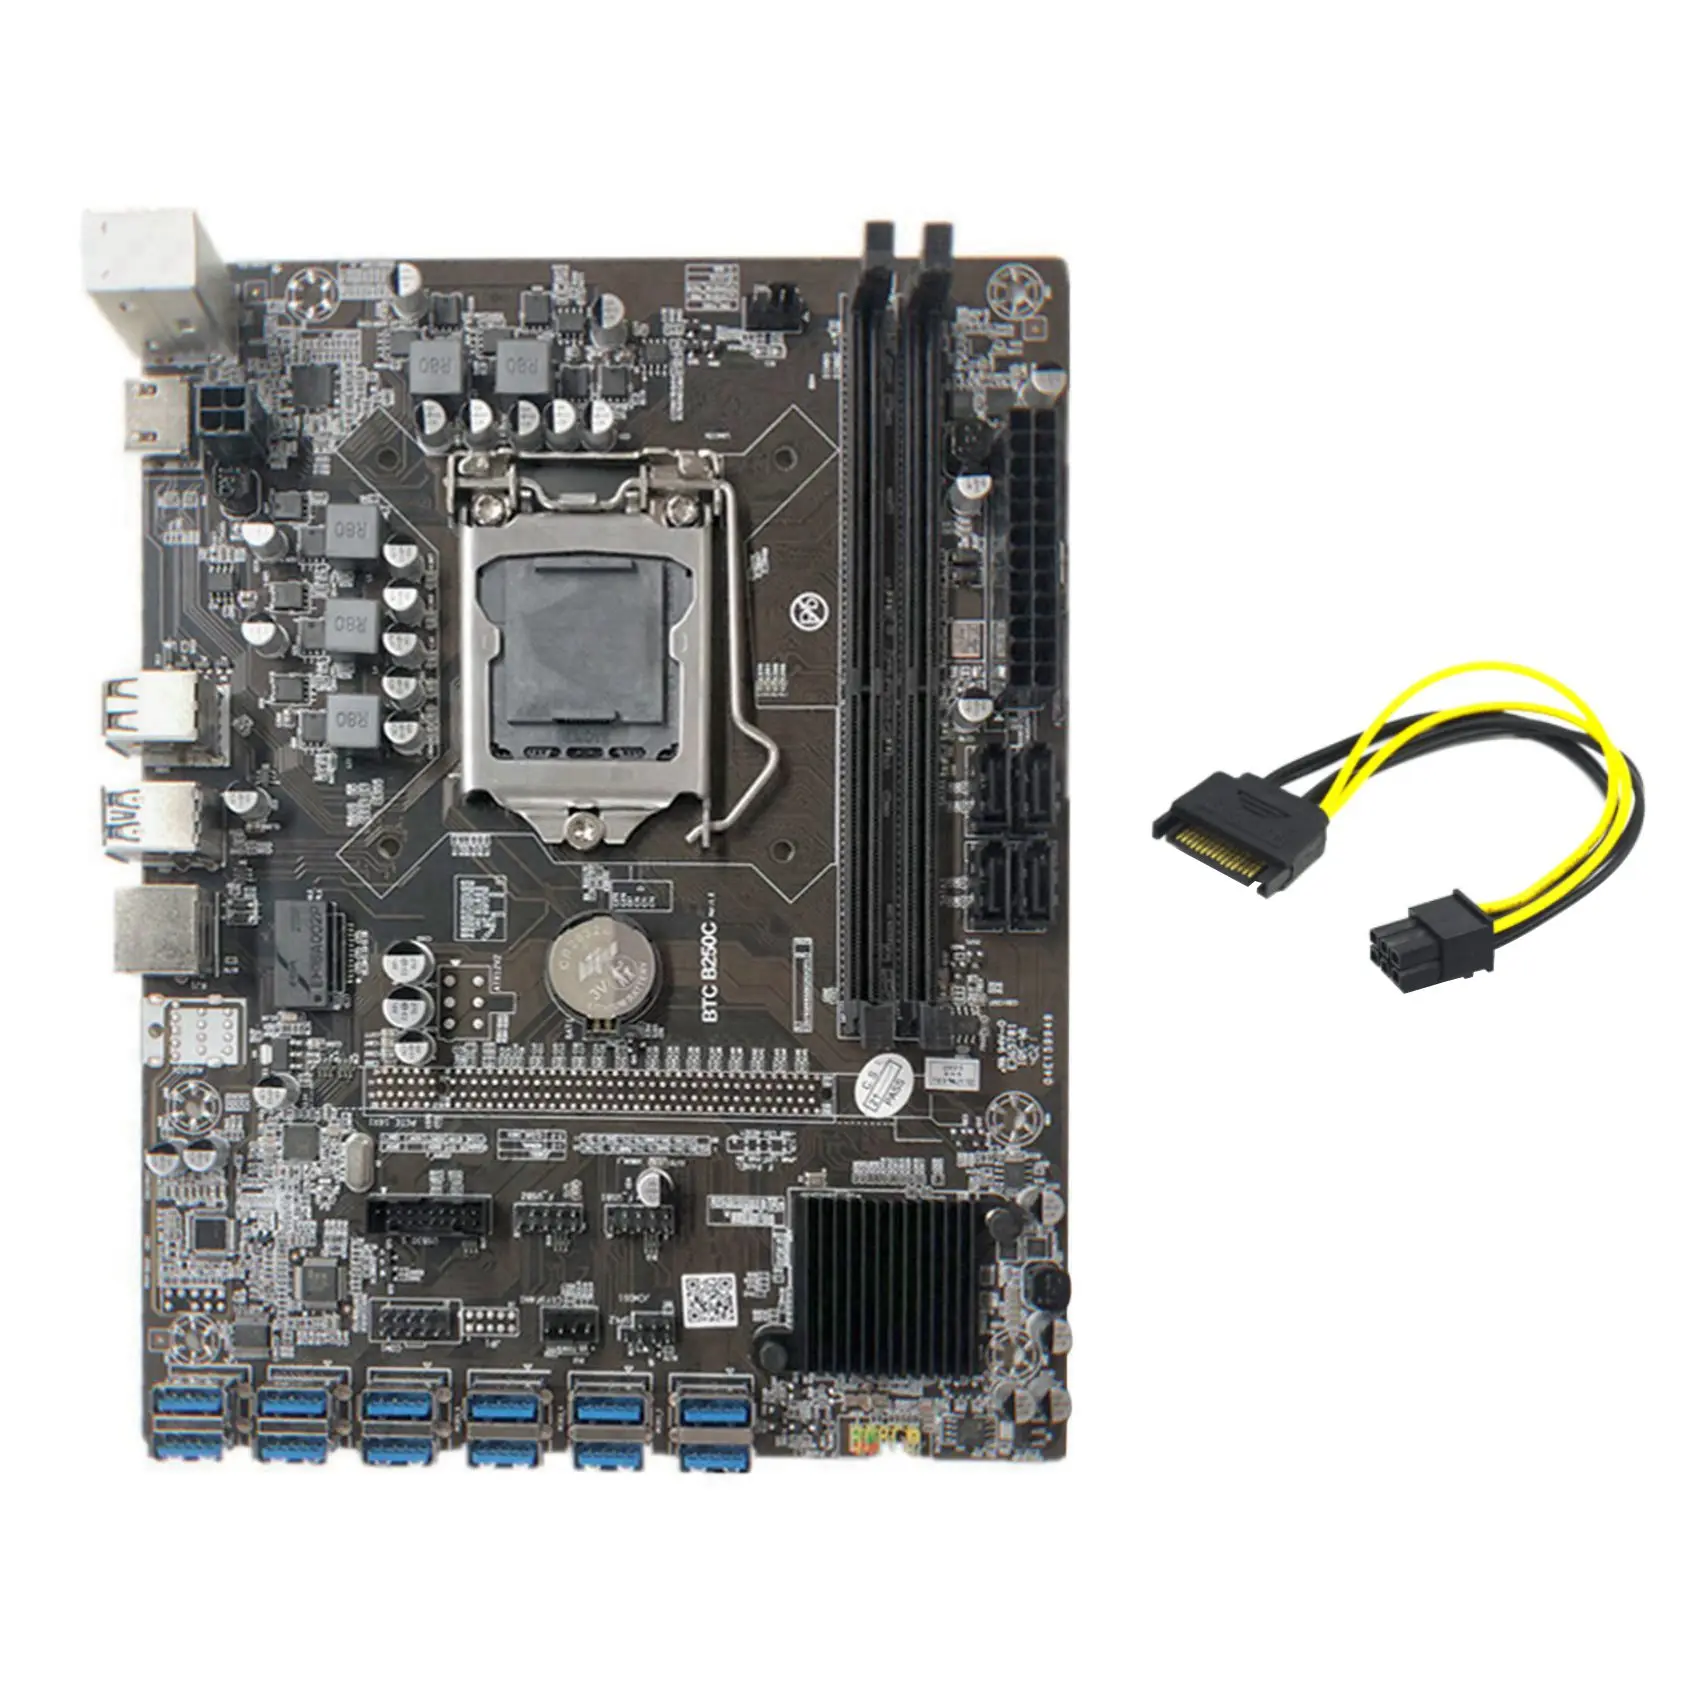 

B250C Mining Motherboard+SATA 15Pin to 6Pin Cable 12 PCIE to USB3.0 GPU Slot LGA1151 Support DDR4 DIMM RAM for BTC Miner